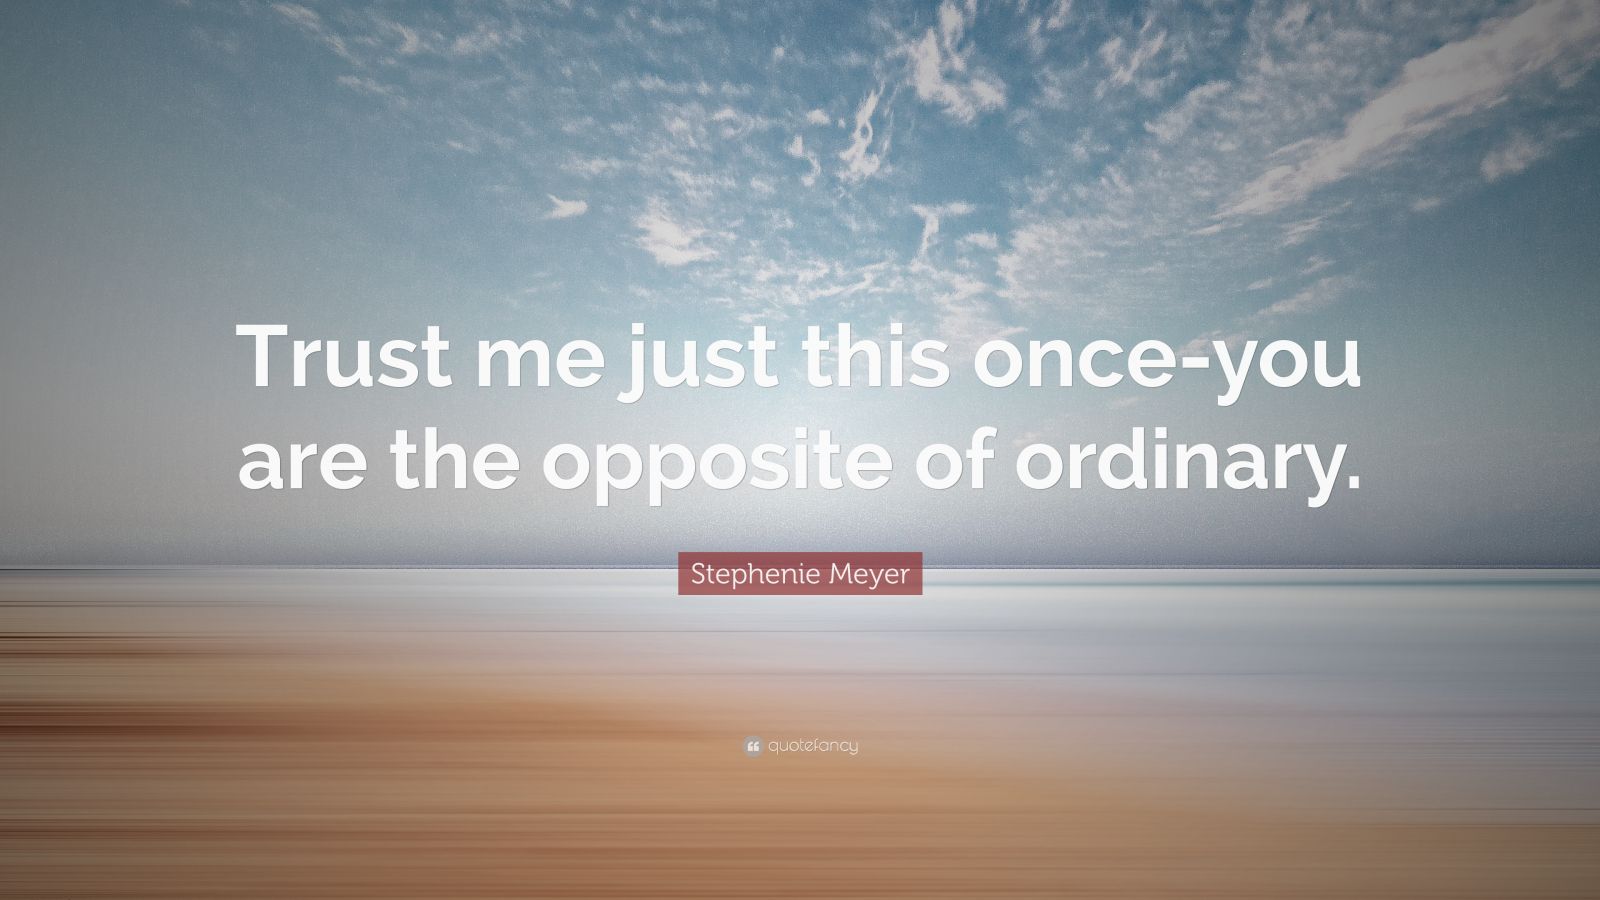 Stephenie Meyer Quote: “Trust me just this once-you are the opposite of ...